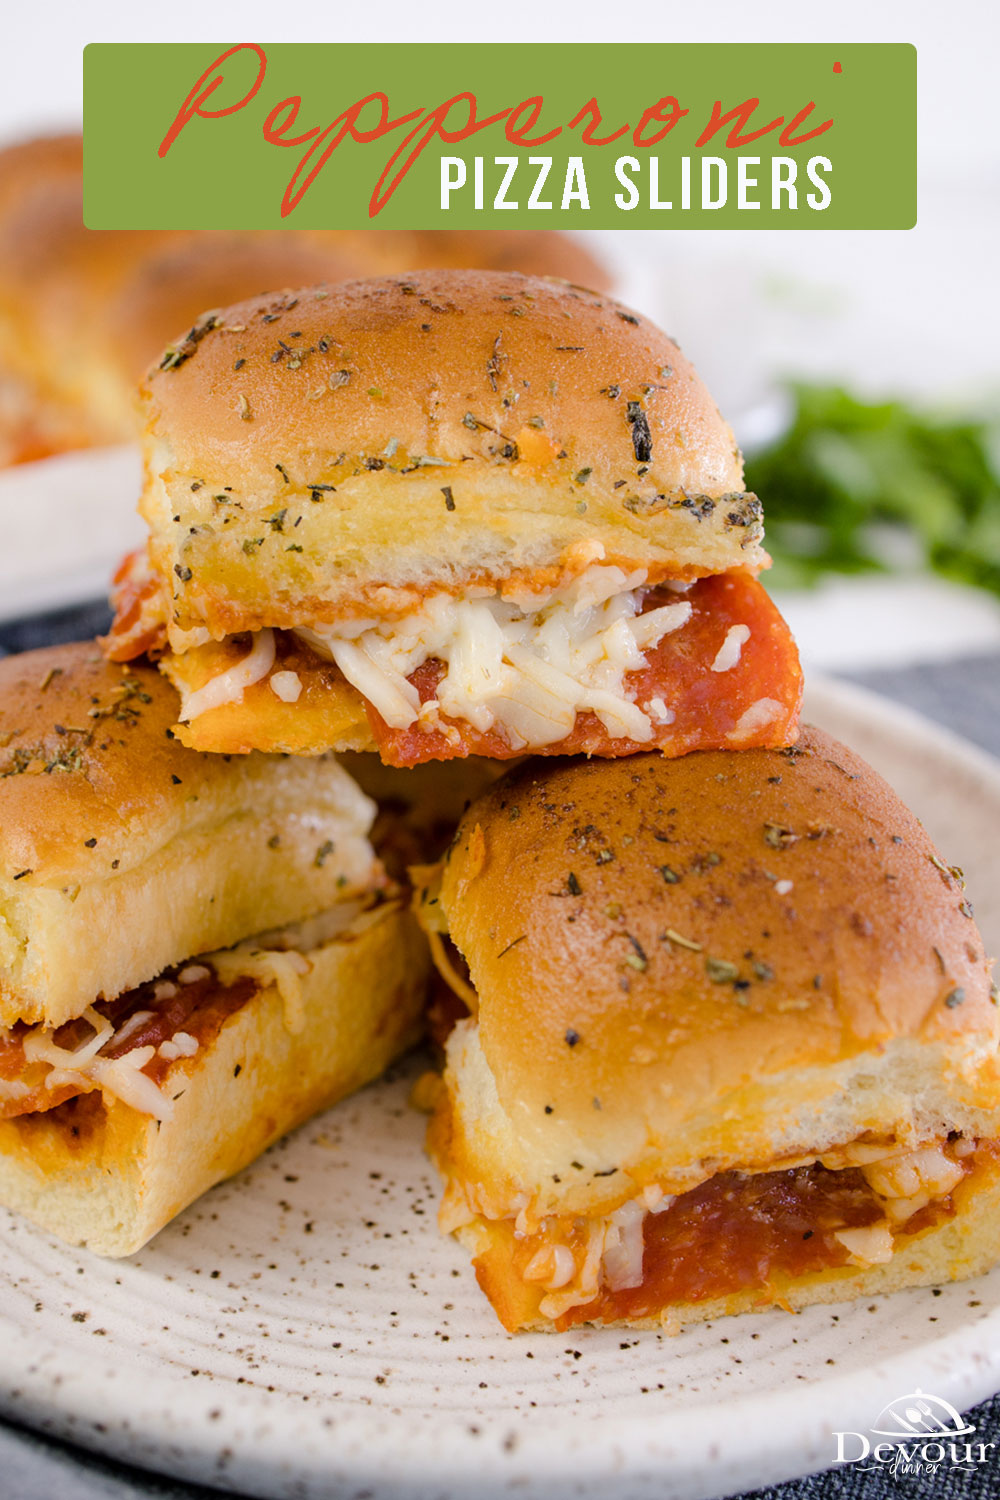 Hot from the oven, these pepperoni Pizza Sliders are a delicious twist on a classic pizza and a favorite slider recipe. These super soft rolls are loaded with marinara sauce, melted cheese, and slices of pepperoni, and are topped with Italian garlic butter.